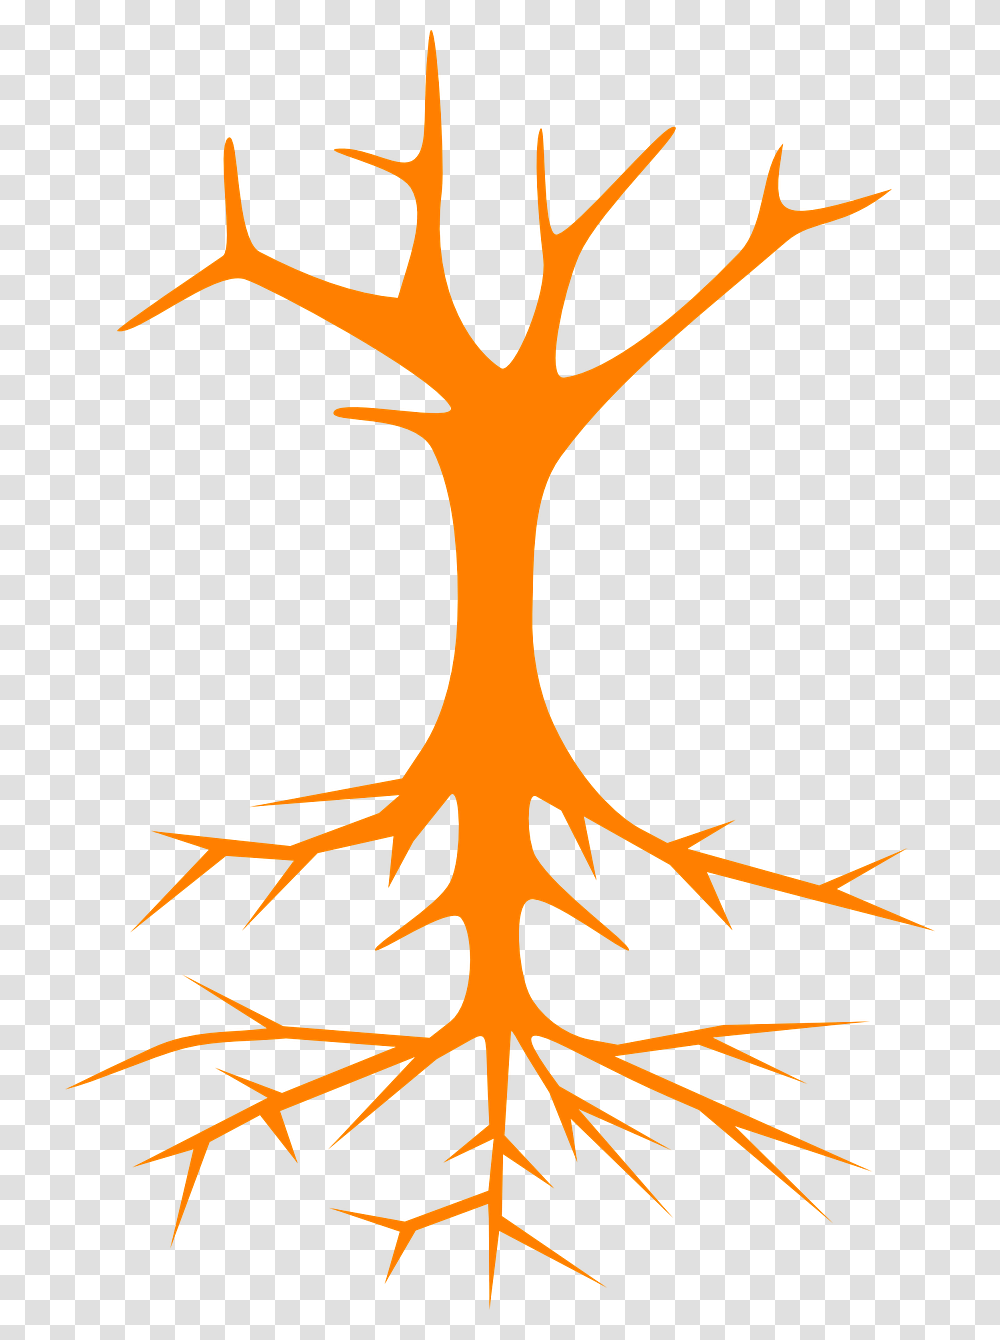 Tree Roots Stem Branches Naked Image, Plant, Cross, Logo Transparent Png